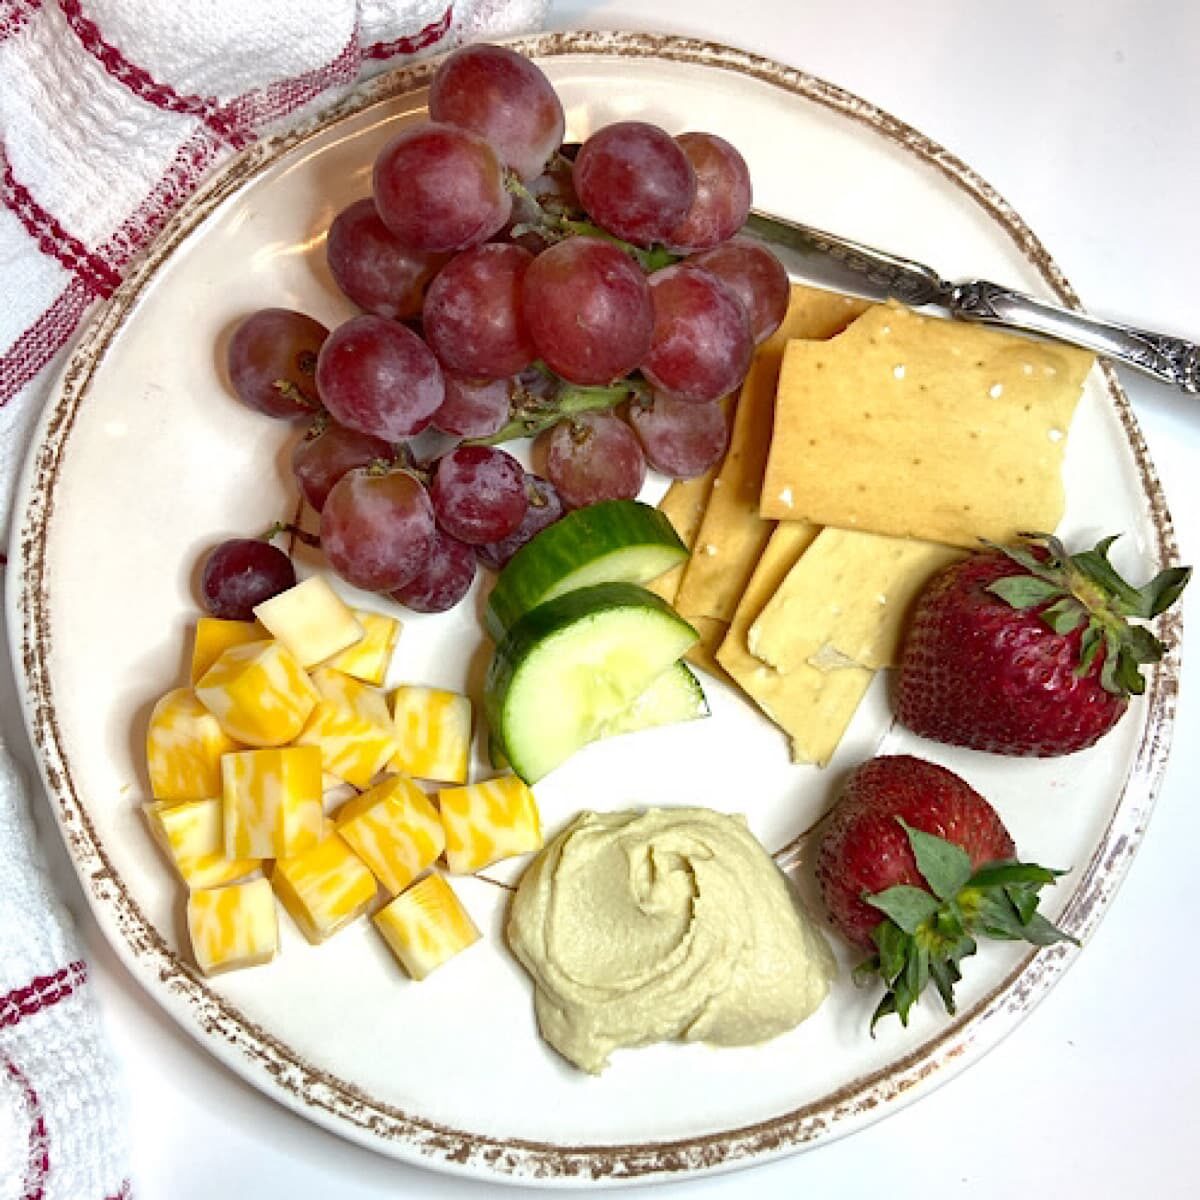 fruit, cheese, vegetables, crackers and hummus on plate.